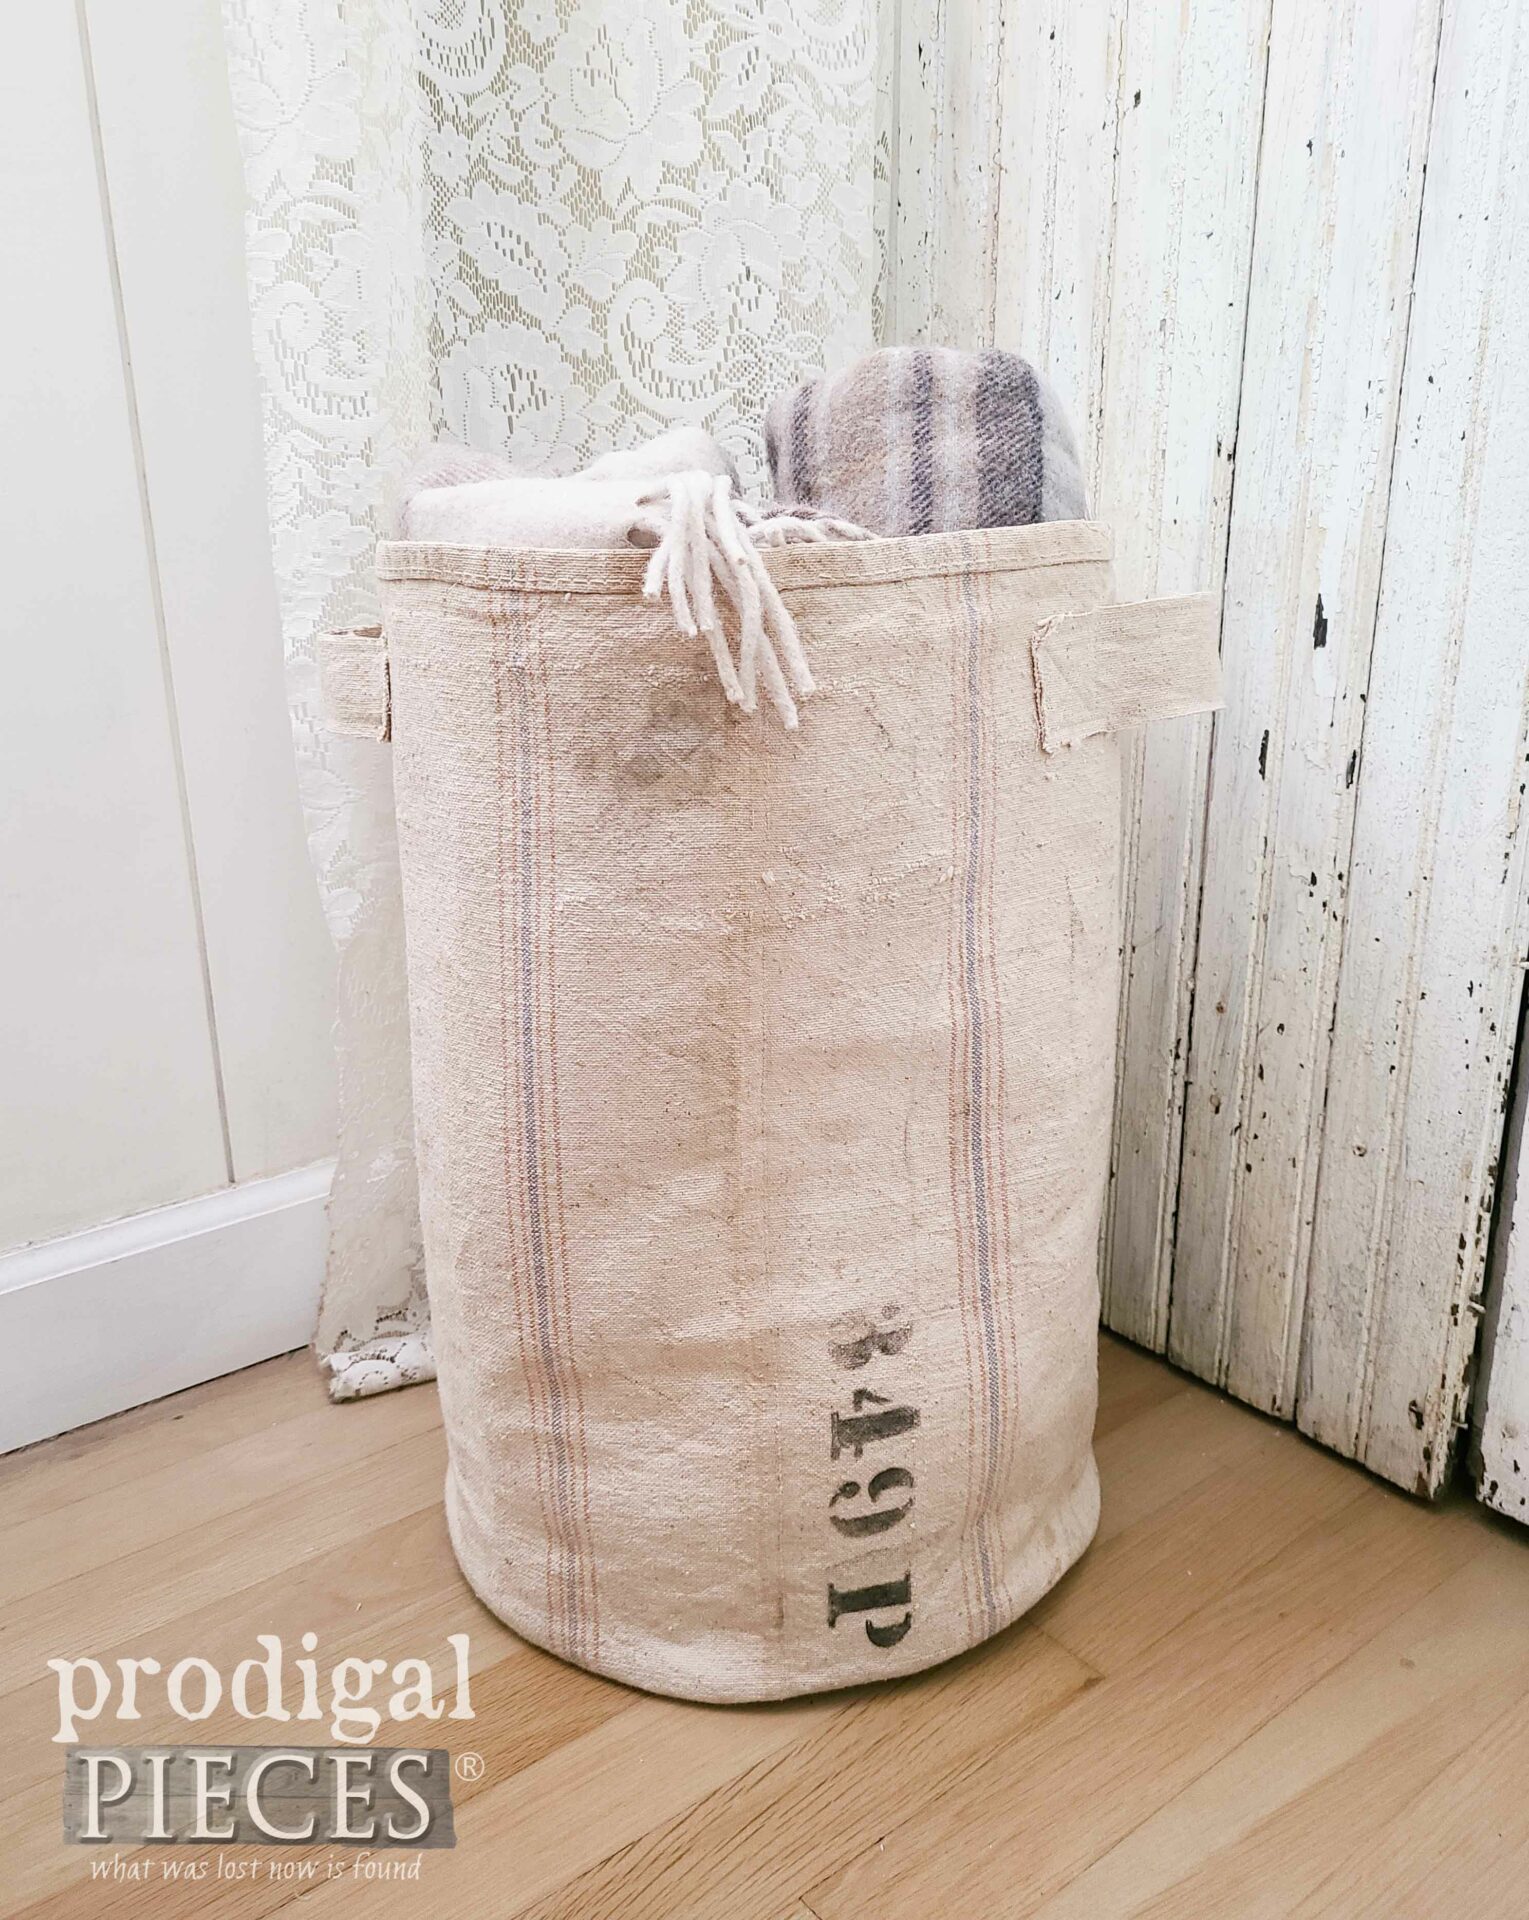 DIY Fabric Bucket from Refashioned Feed Sack by Larissa of Prodigal Pieces | prodigalpieces.com #prodigalpieces #farmhouse #diy #upcycled